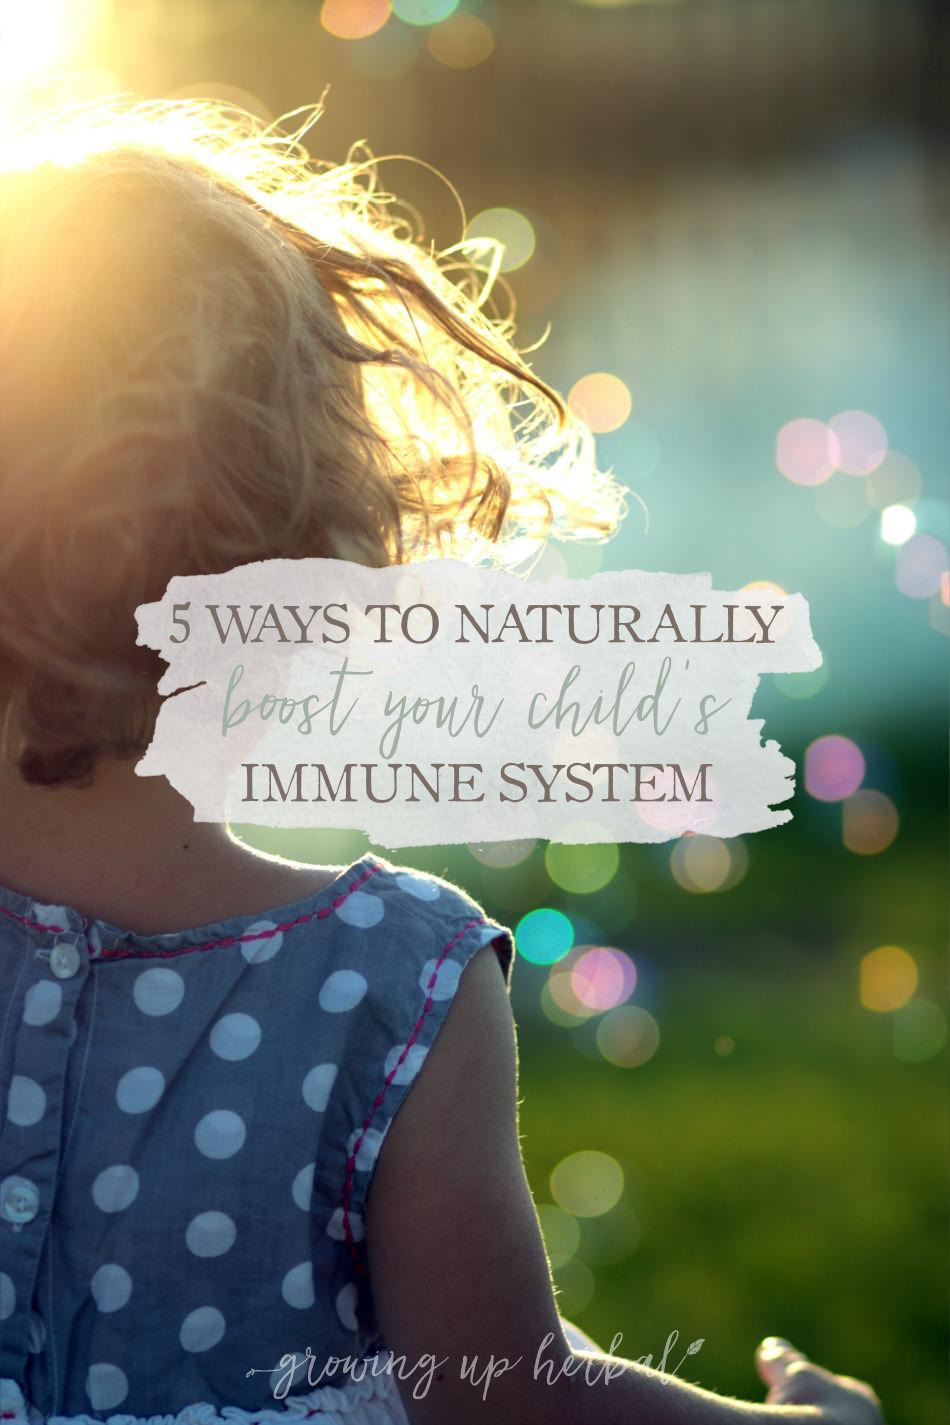 5 Ways To Naturally Boost Your Child's Immune System | Growing Up Herbal | Cold and flu season will be here before you know it. Learn 5 ways you can naturally boost your child's immune system this year!